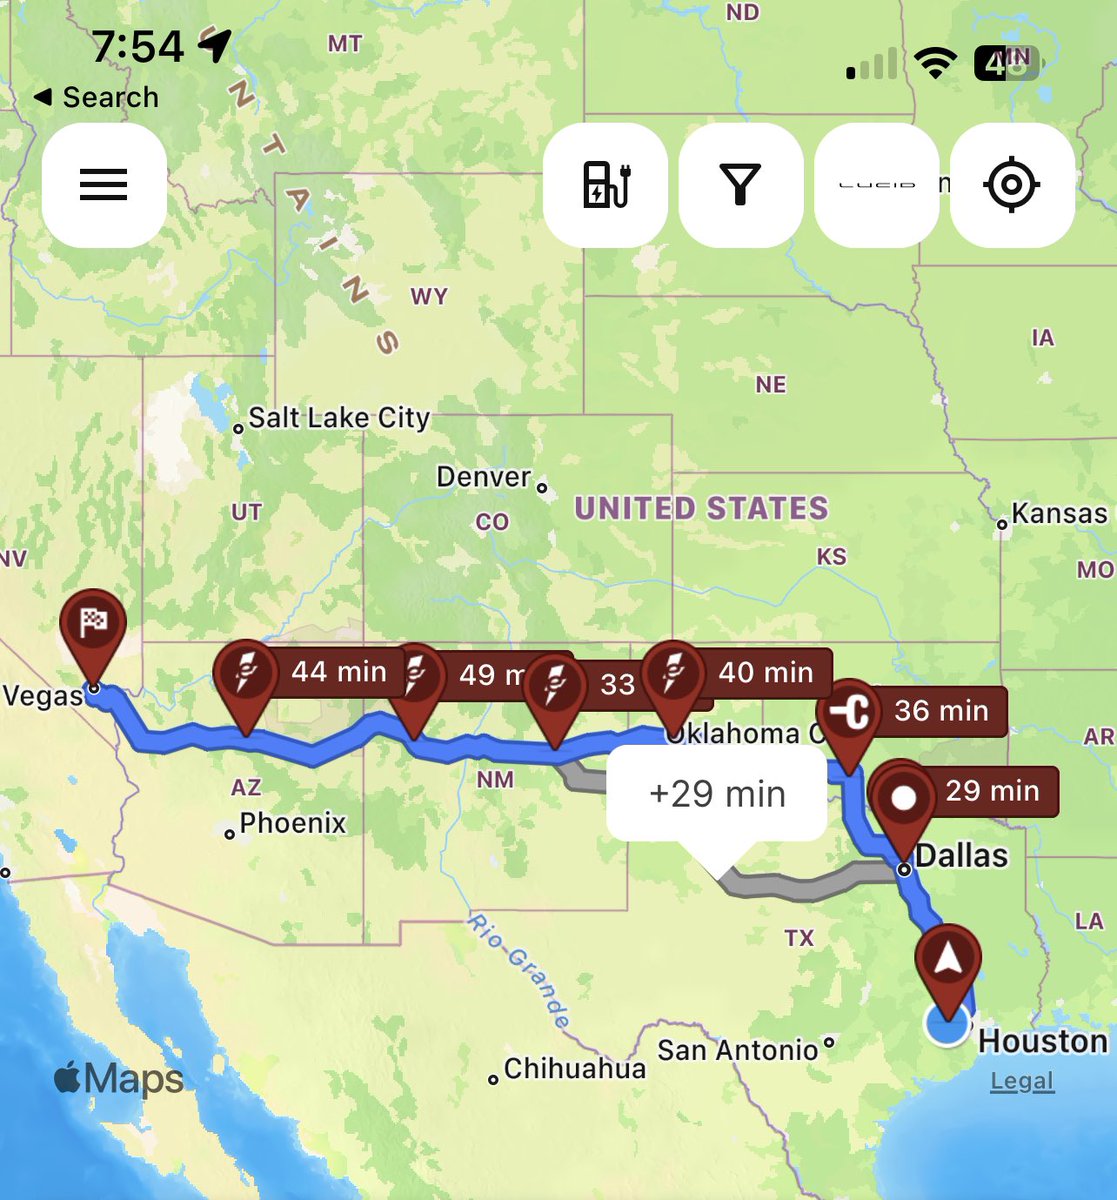 3000+ miles round trip roadtrip coming up. This time I’m taking my Lucid Air GT 21” for the ride. #ElectrifyAmerica #EVGo #ChargePoint #CCS stations will be tested. Fingers crossed! 😊
@RateYourCharge 

@LucidMotors #lucid $LCID #lucidownersclub #LucidAir #AirGT